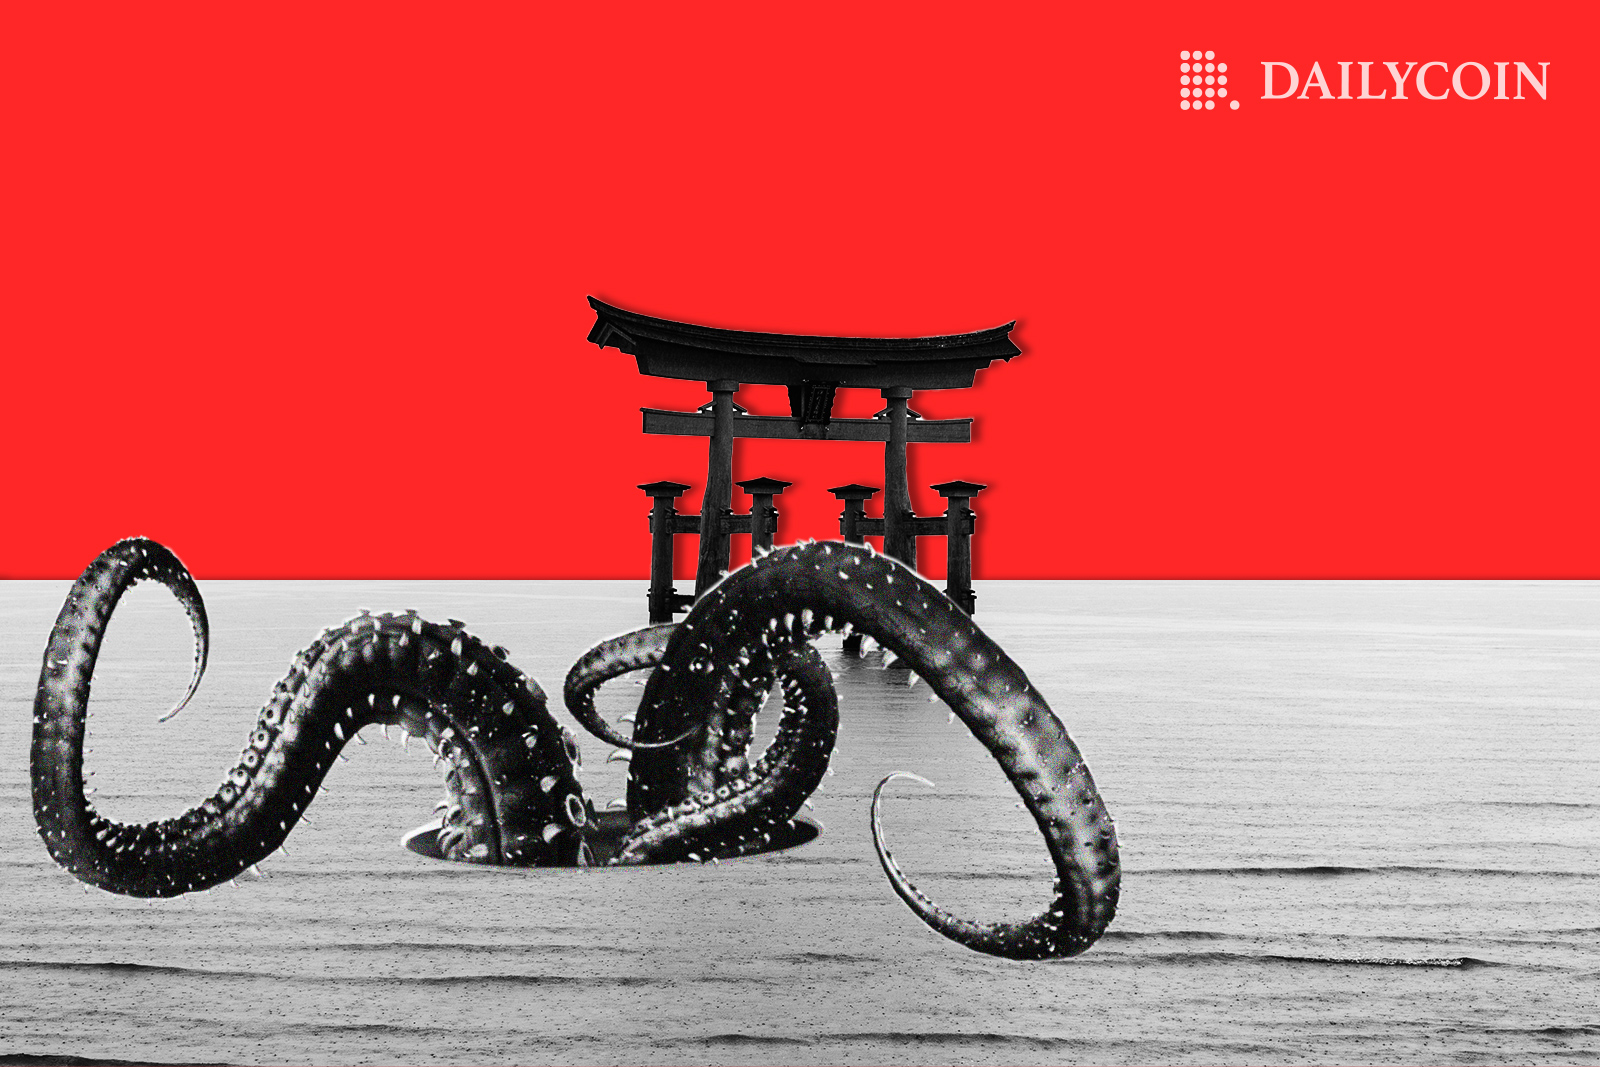 Kraken to Cease Operations in Japan Citing a Weak Crypto Market